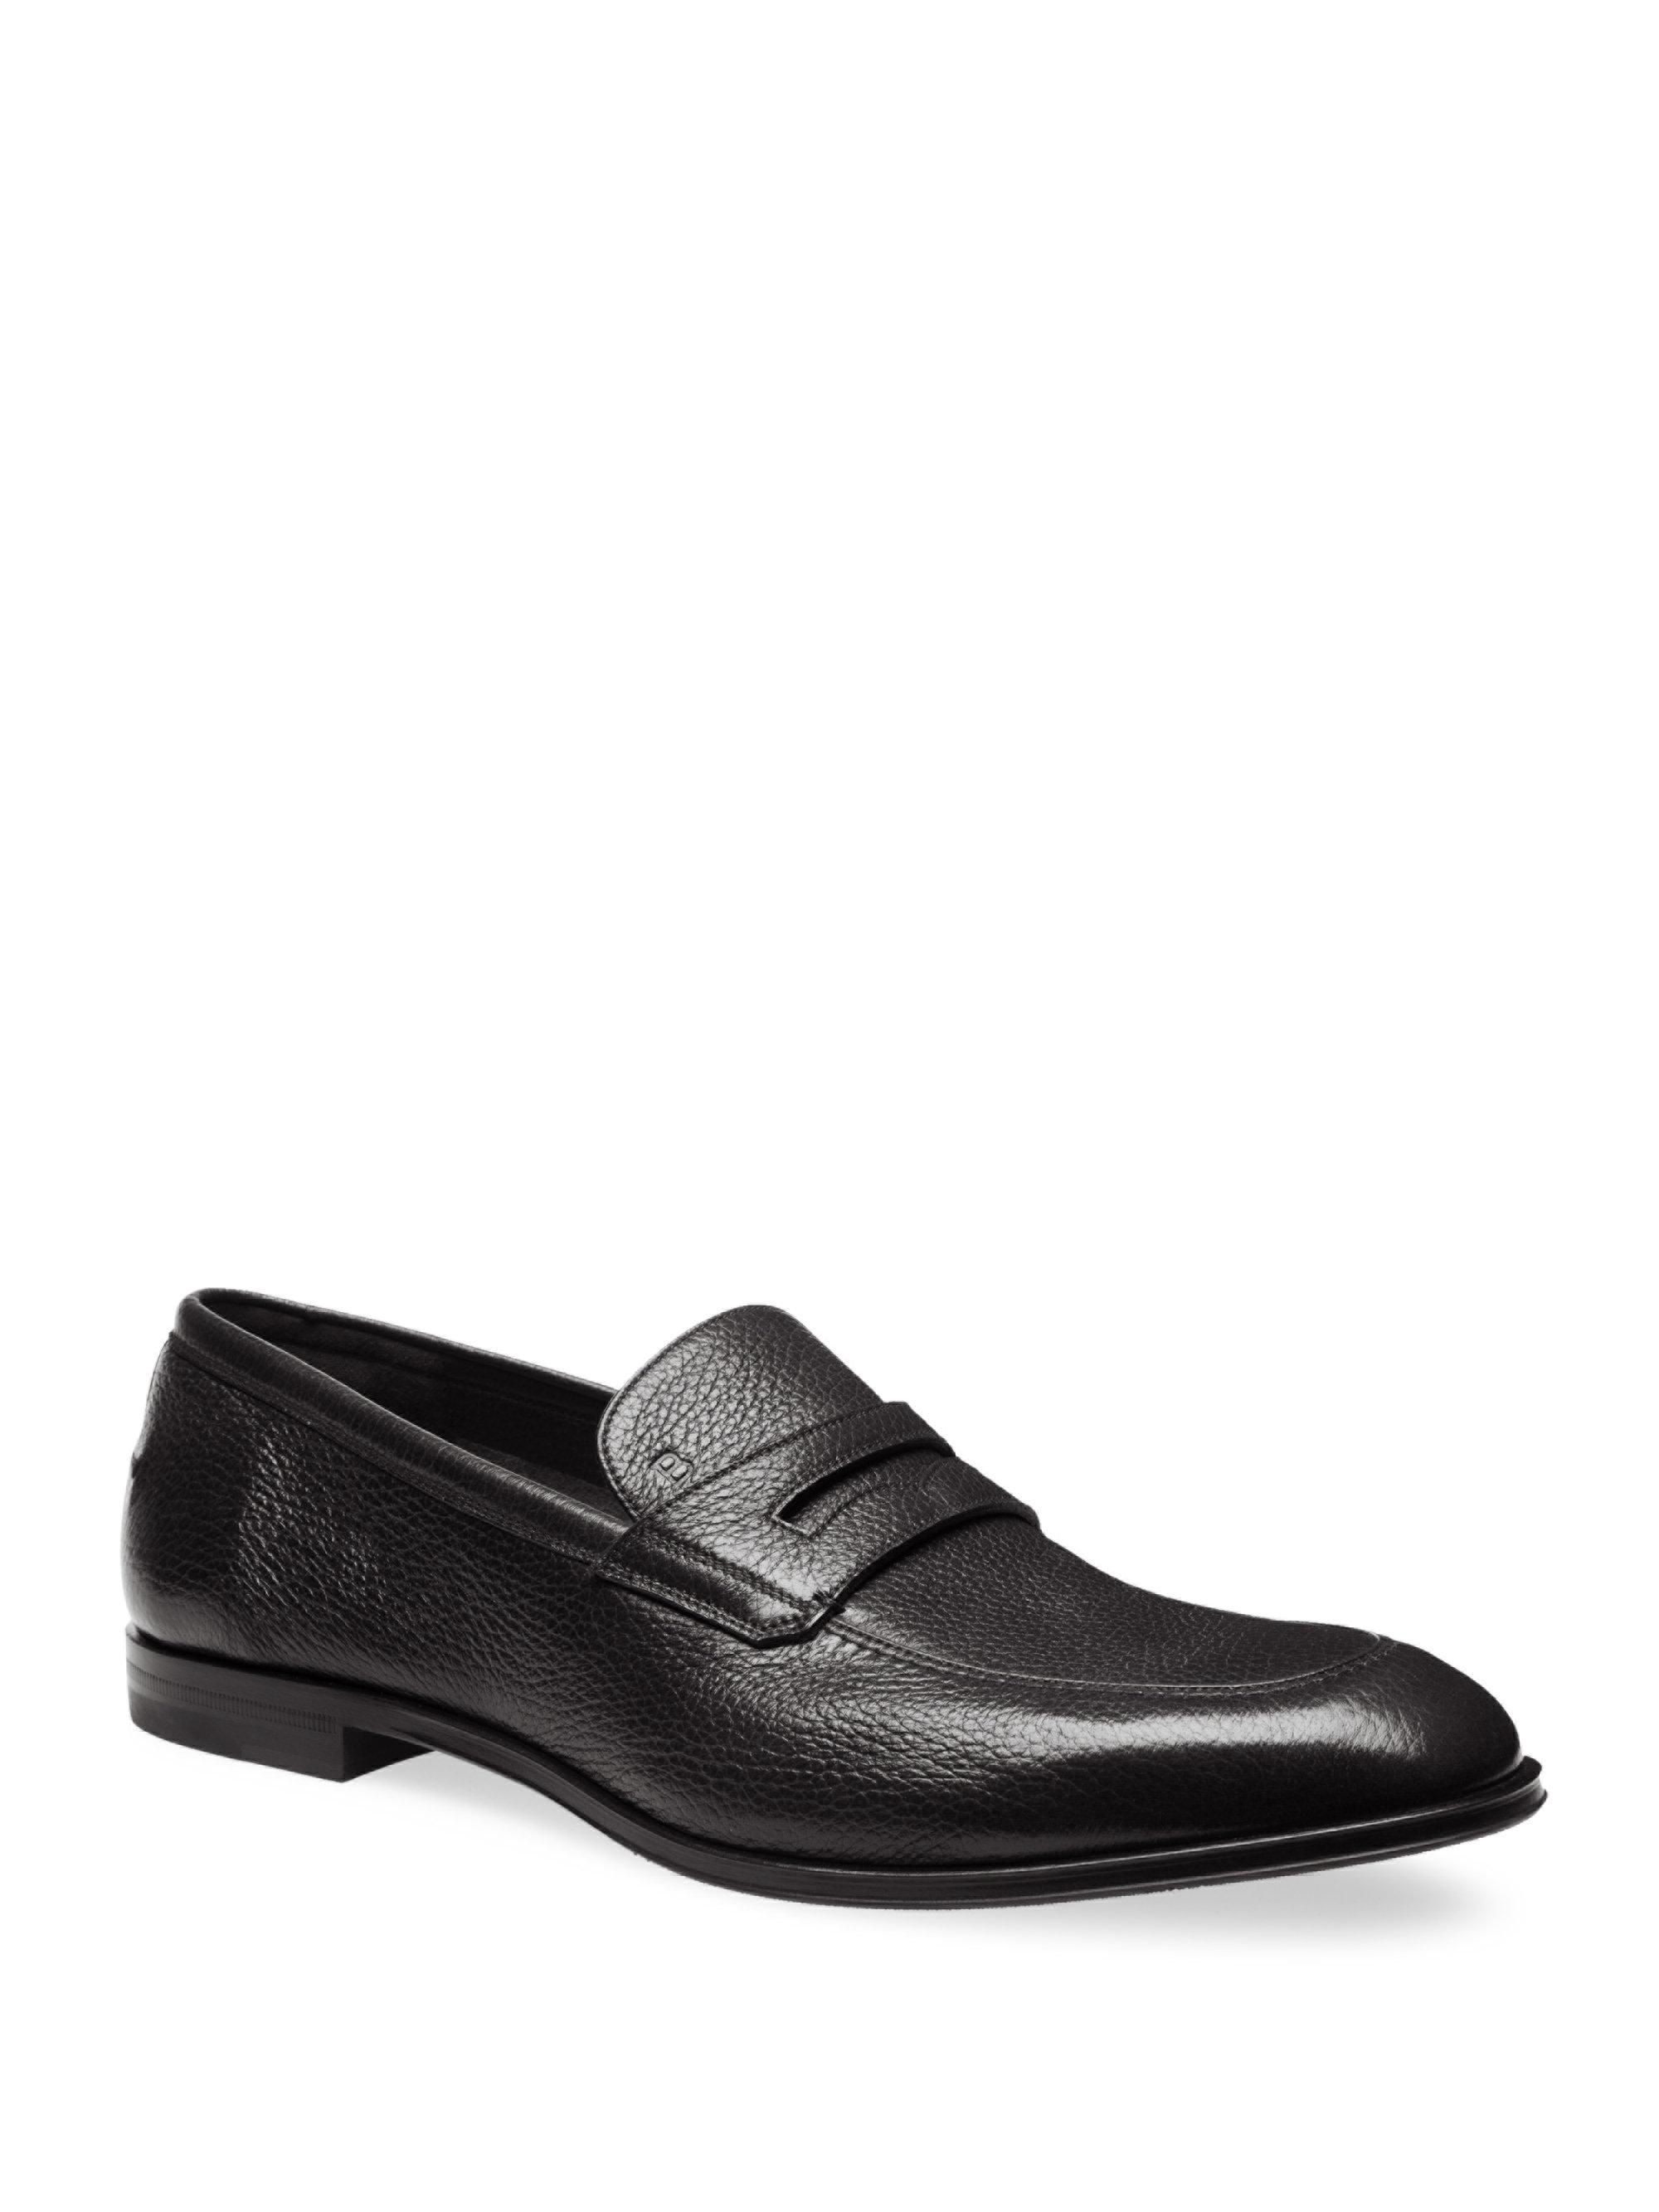 Bally Webb Grained Leather Penny Loafers in Black for Men - Lyst